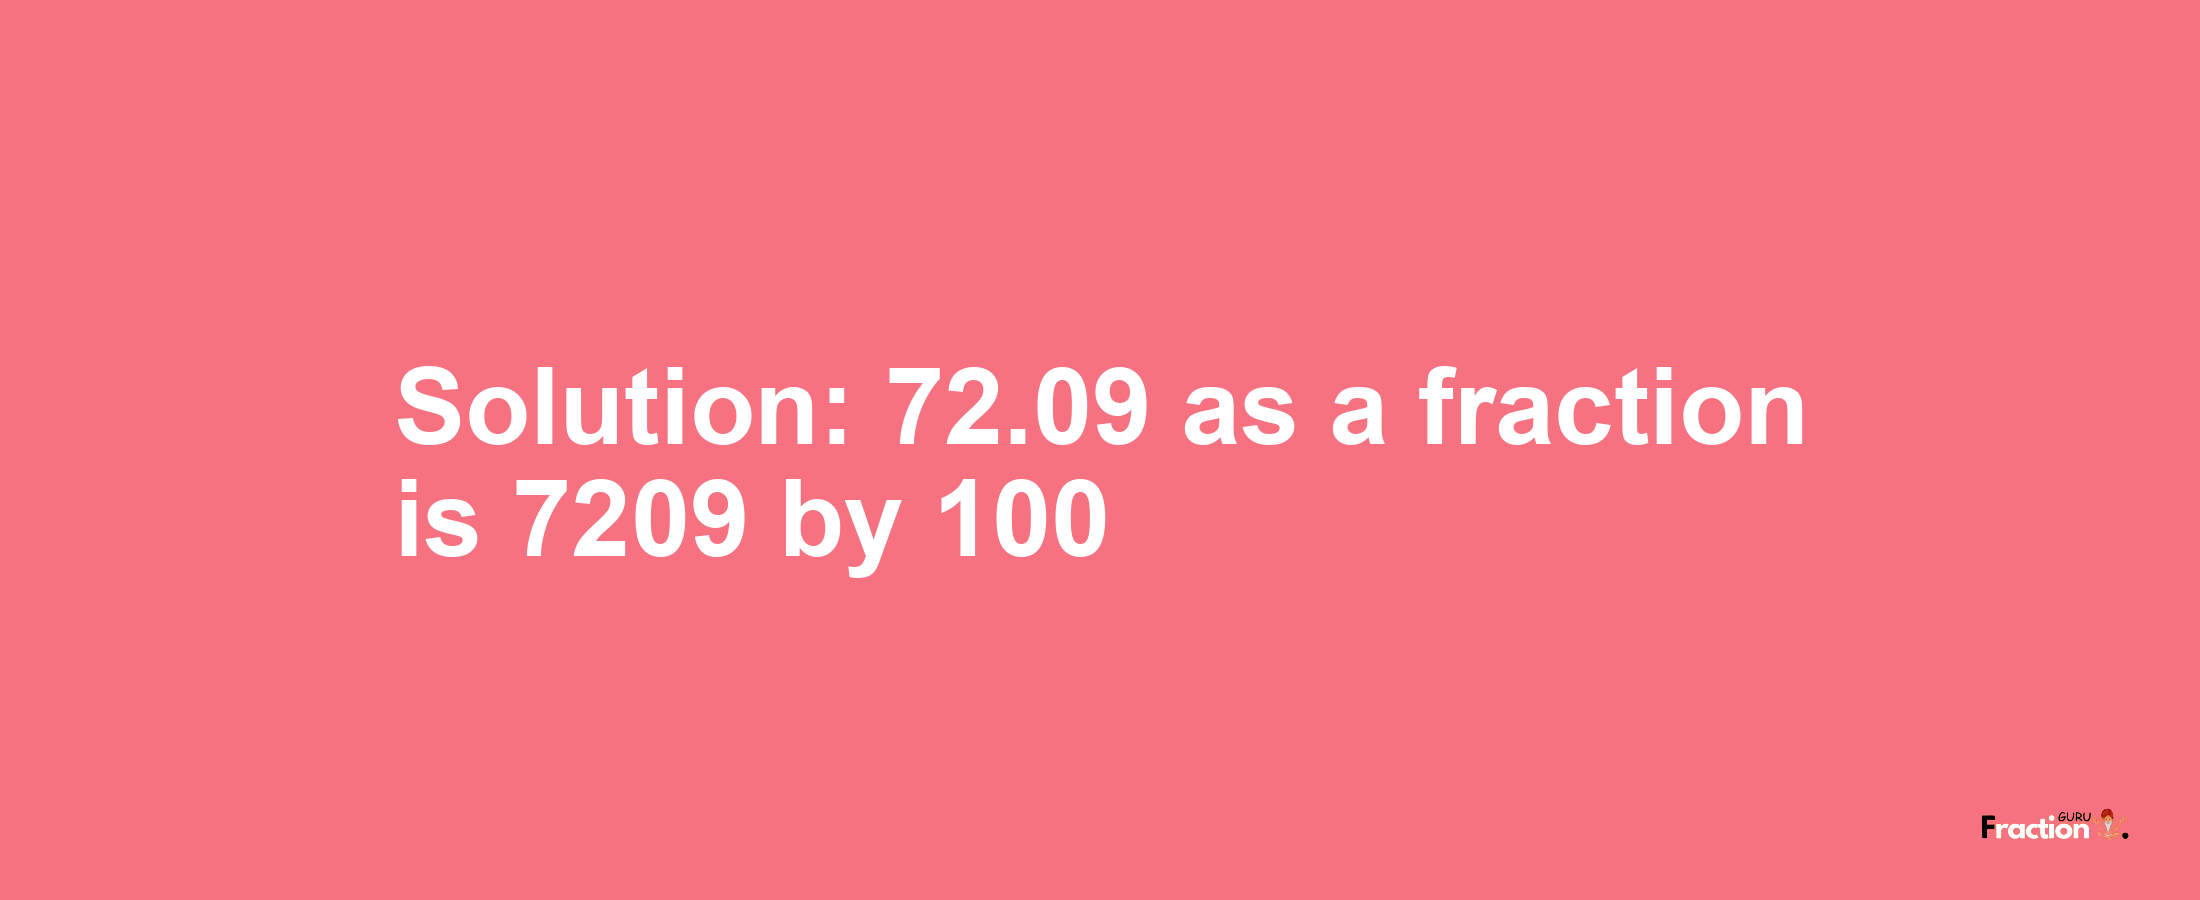 Solution:72.09 as a fraction is 7209/100